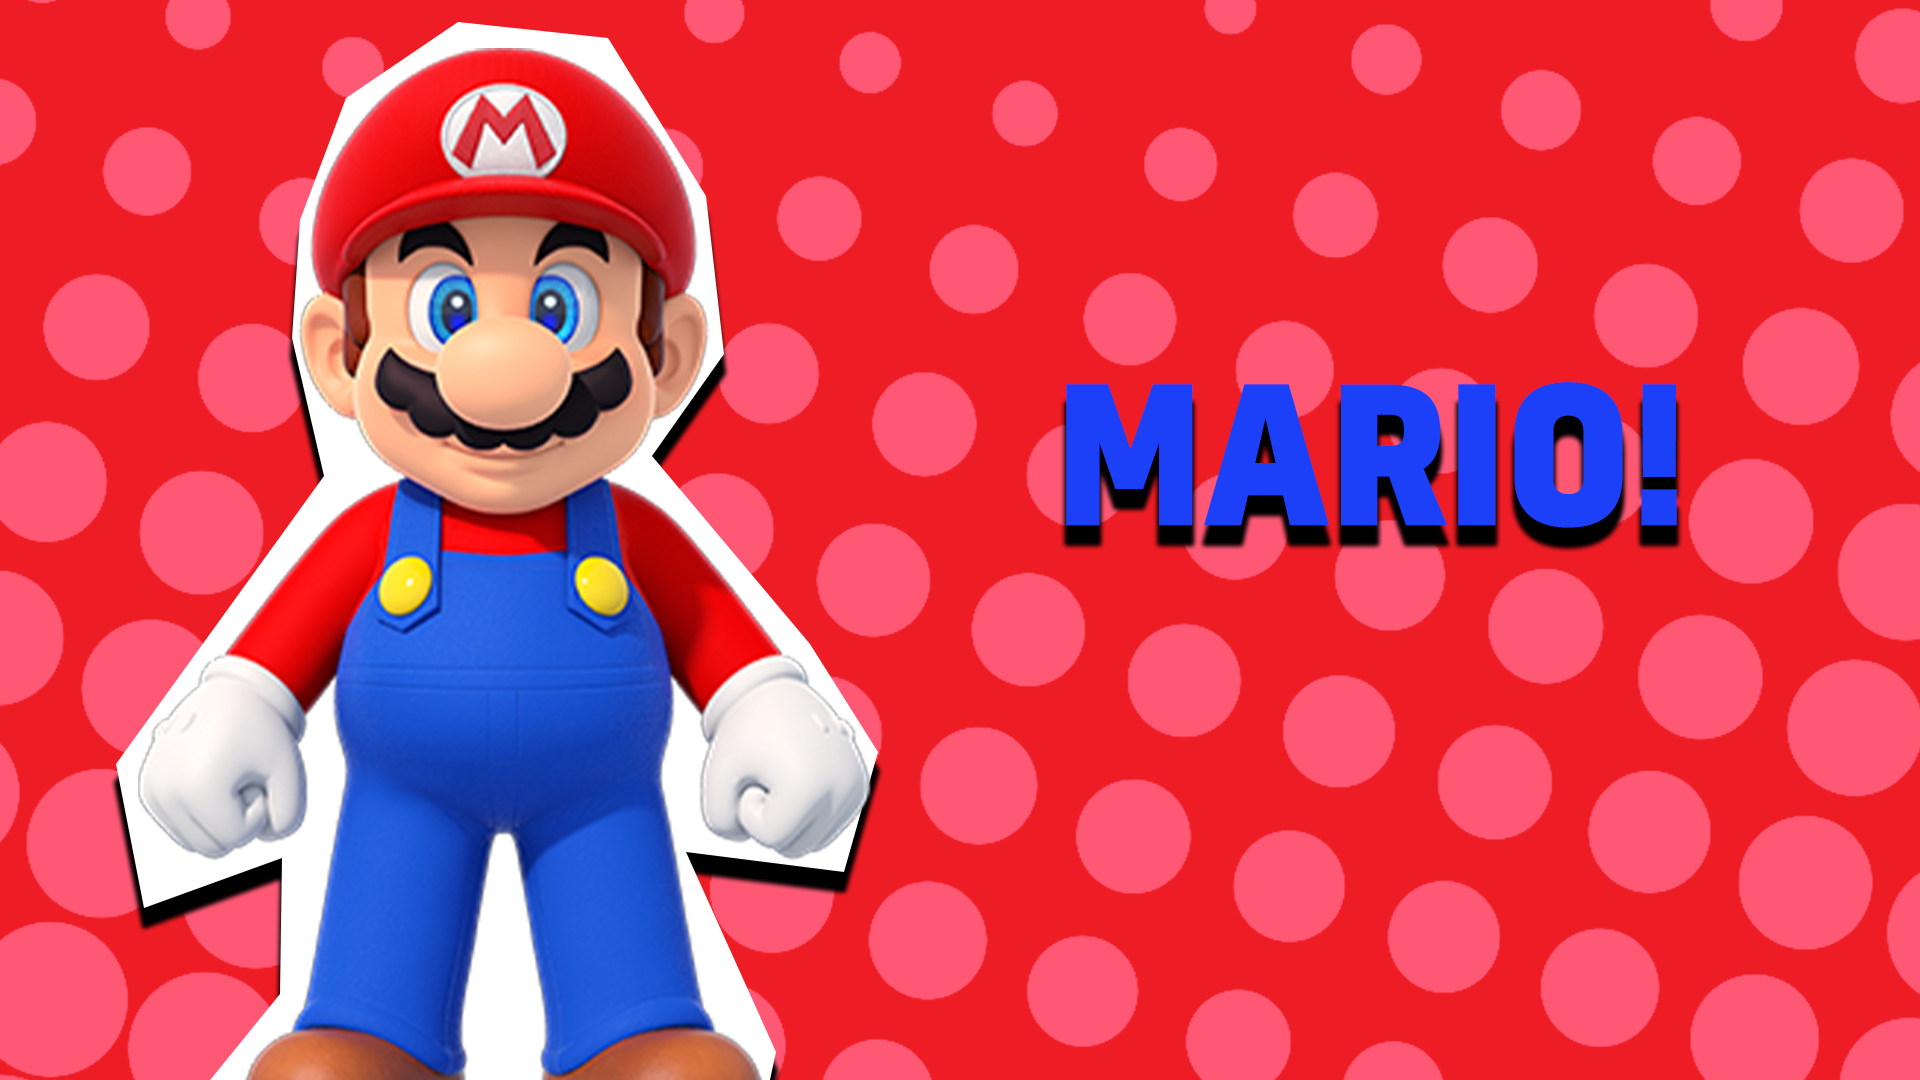 You are Mario! You're small, cheerful and you love working with others to achieve your goals! You also love pizza, but that might be a coincidence.